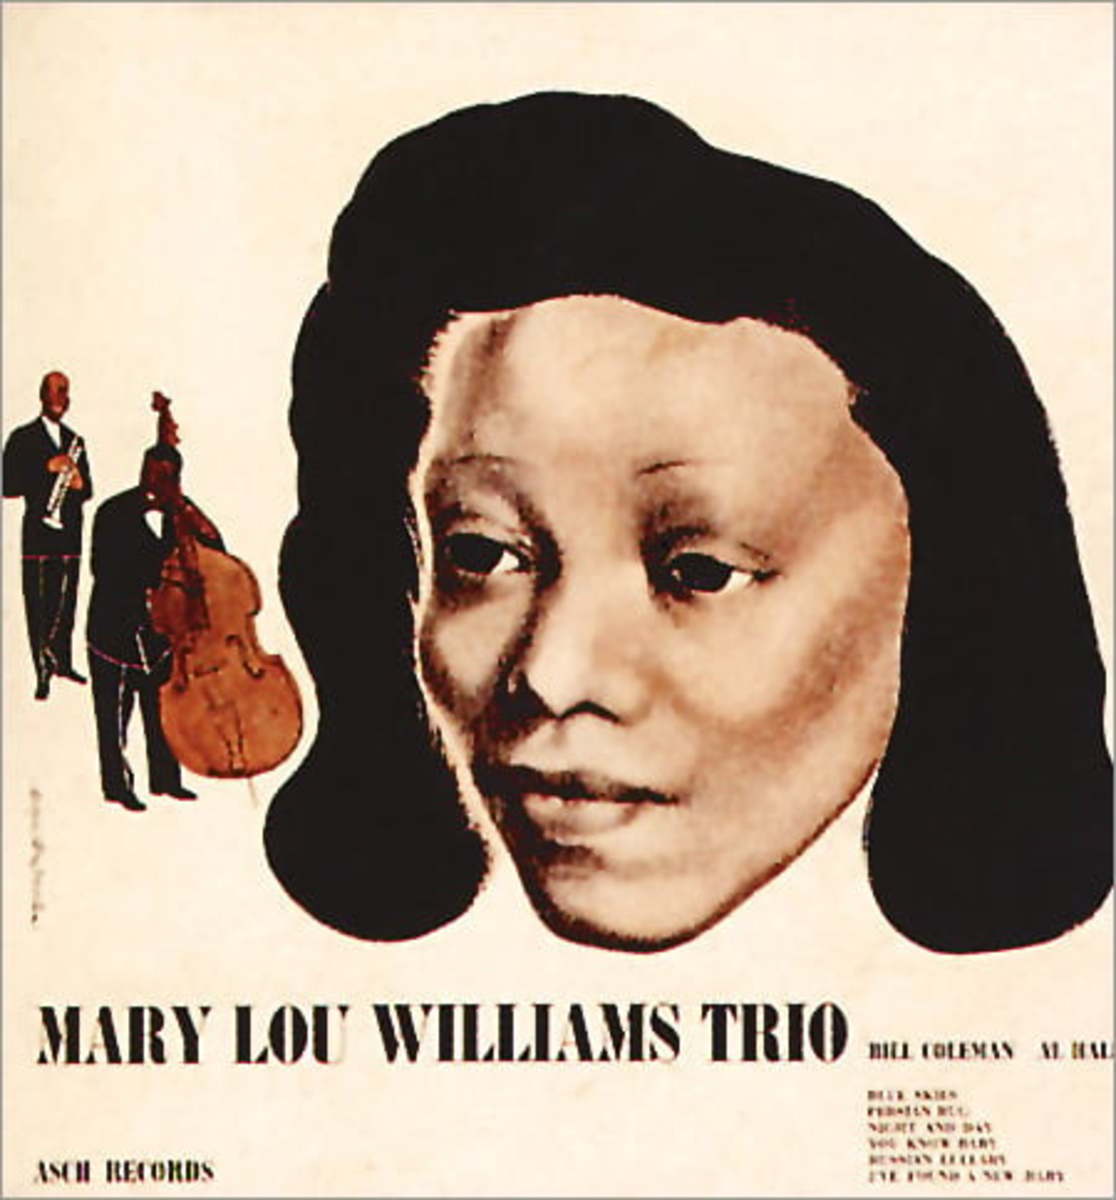 The very first record cover DSM designed. For a 78rpm album of his friend Mary Lou Williams and her trio, 1944